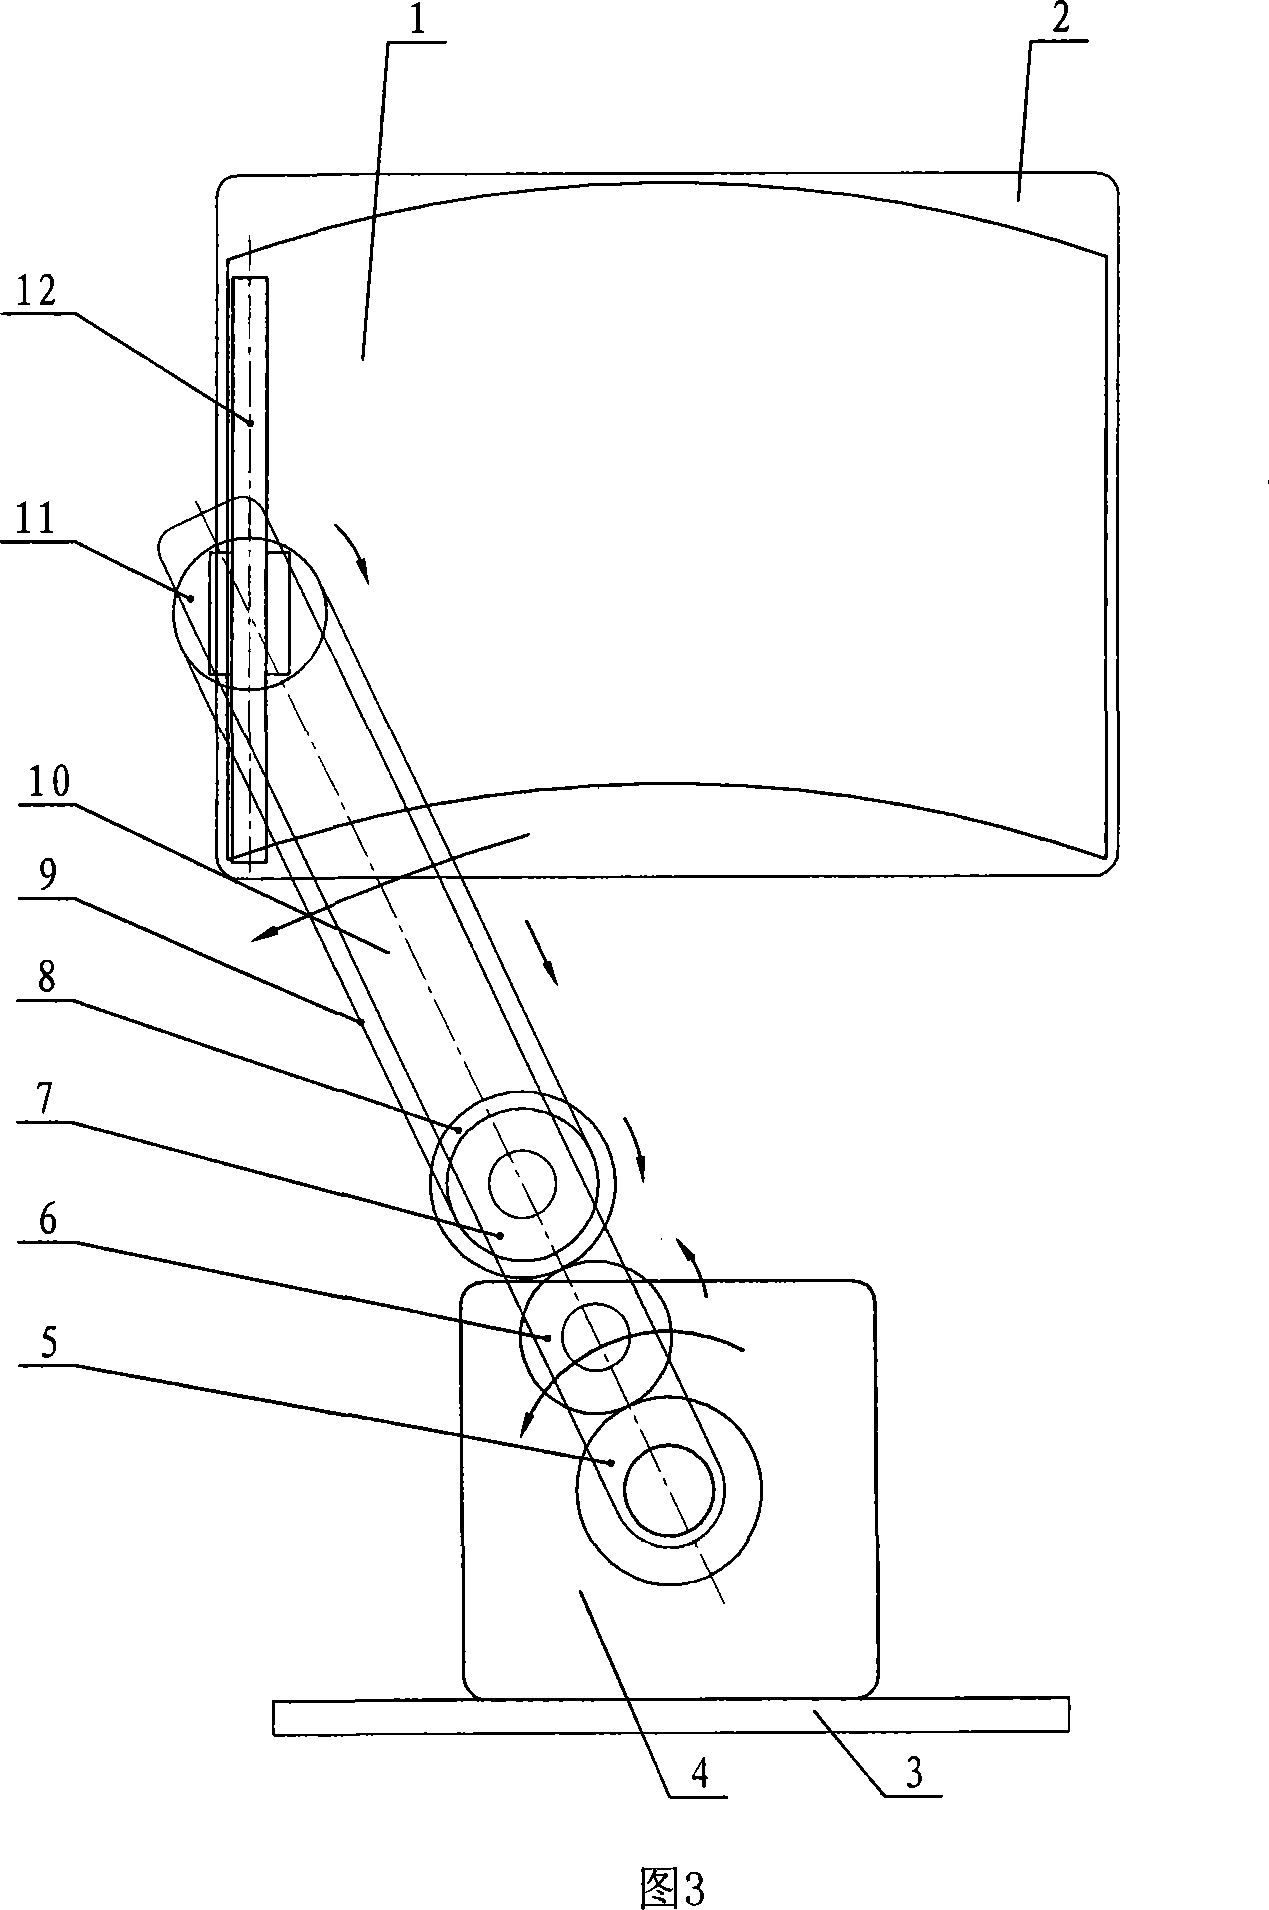 Single-arm windshield wiper with circular ring shaped section